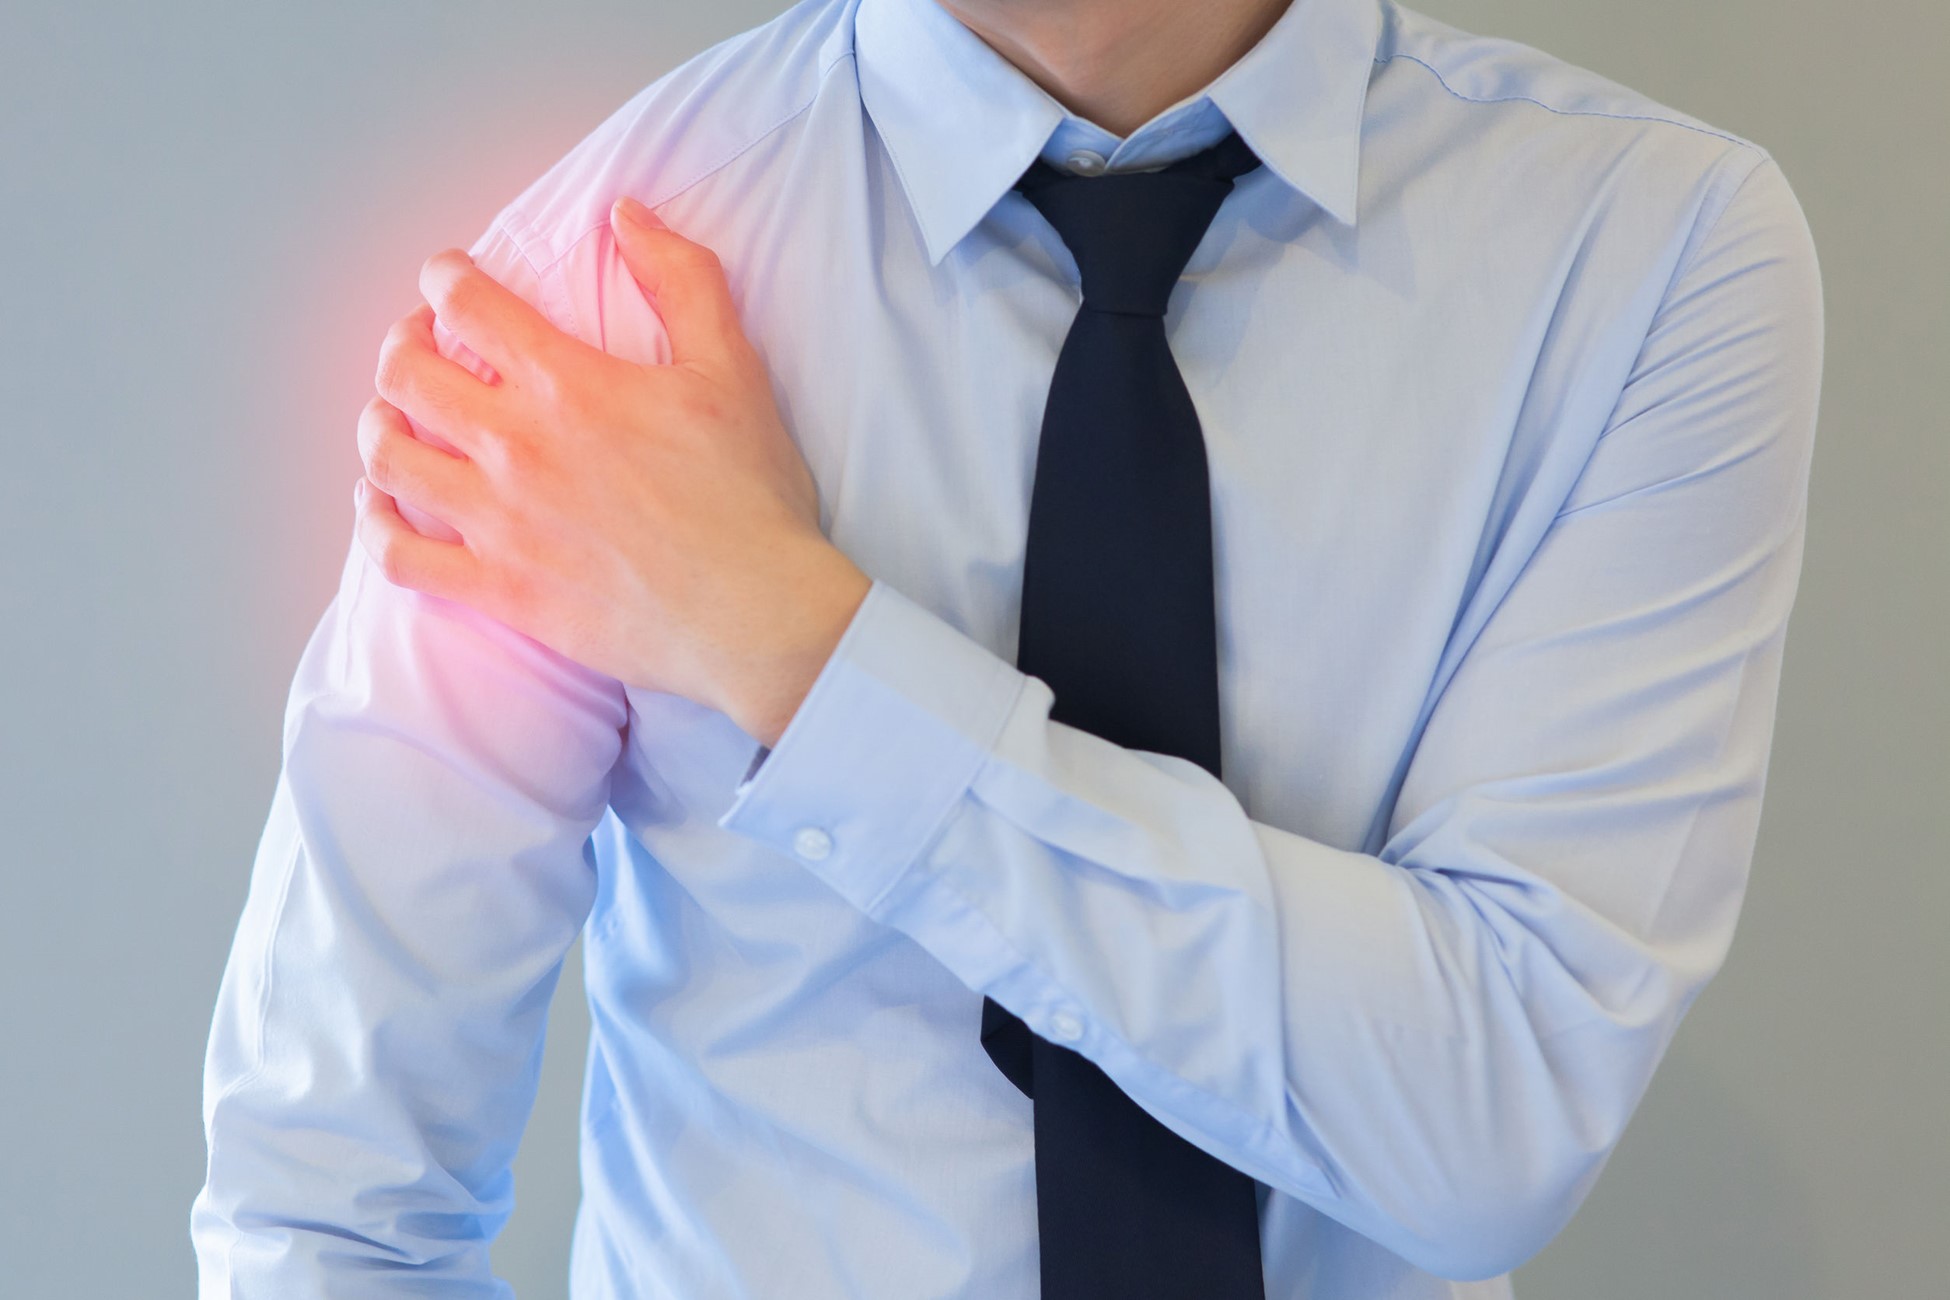 Body Pain is a Sign of Chronic Inflammation